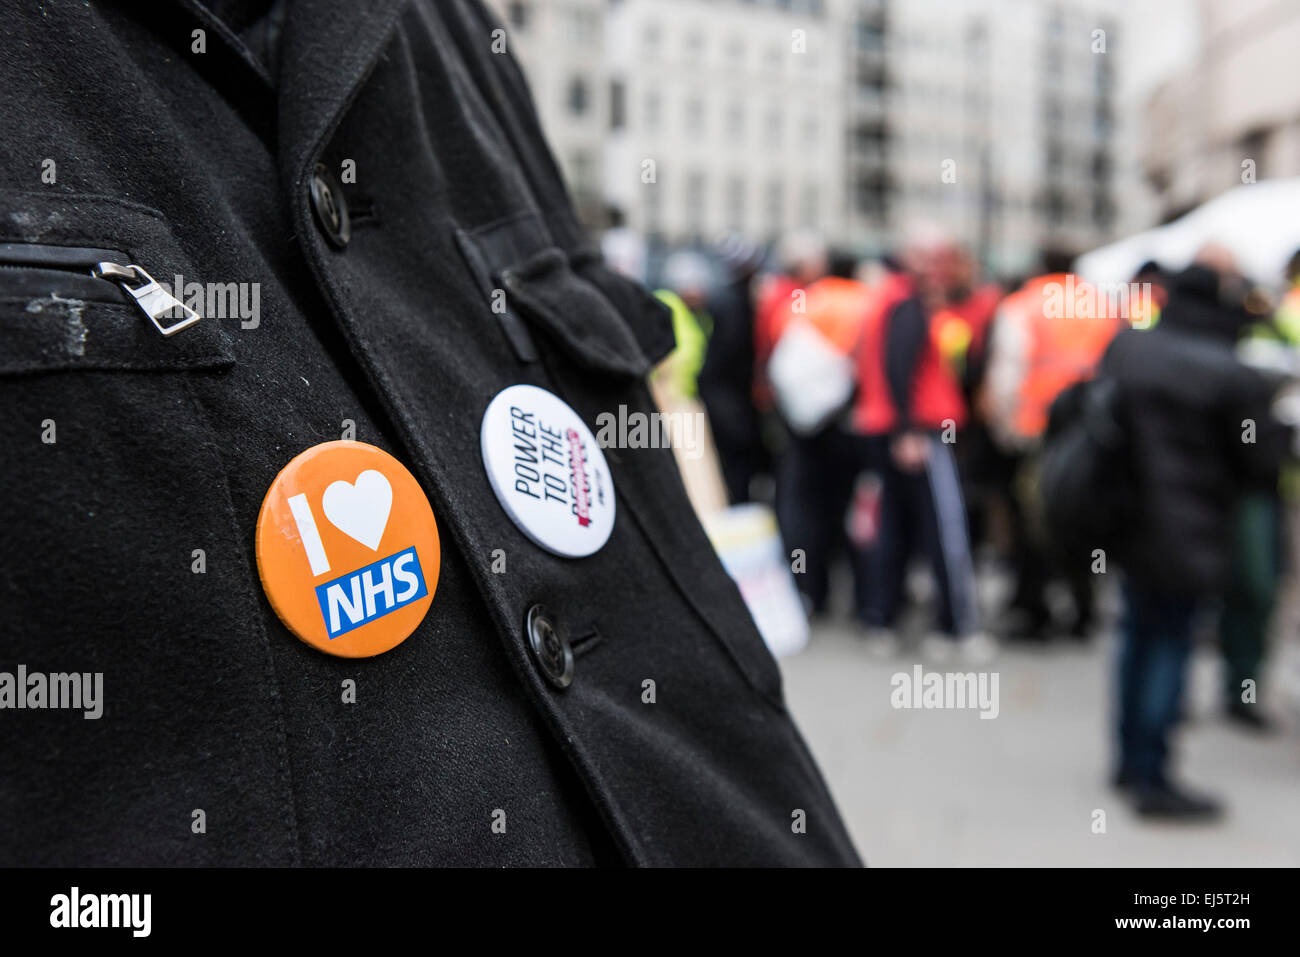 A national demonstration against racism and fascism organised by Stand Up To Racism. Stock Photo